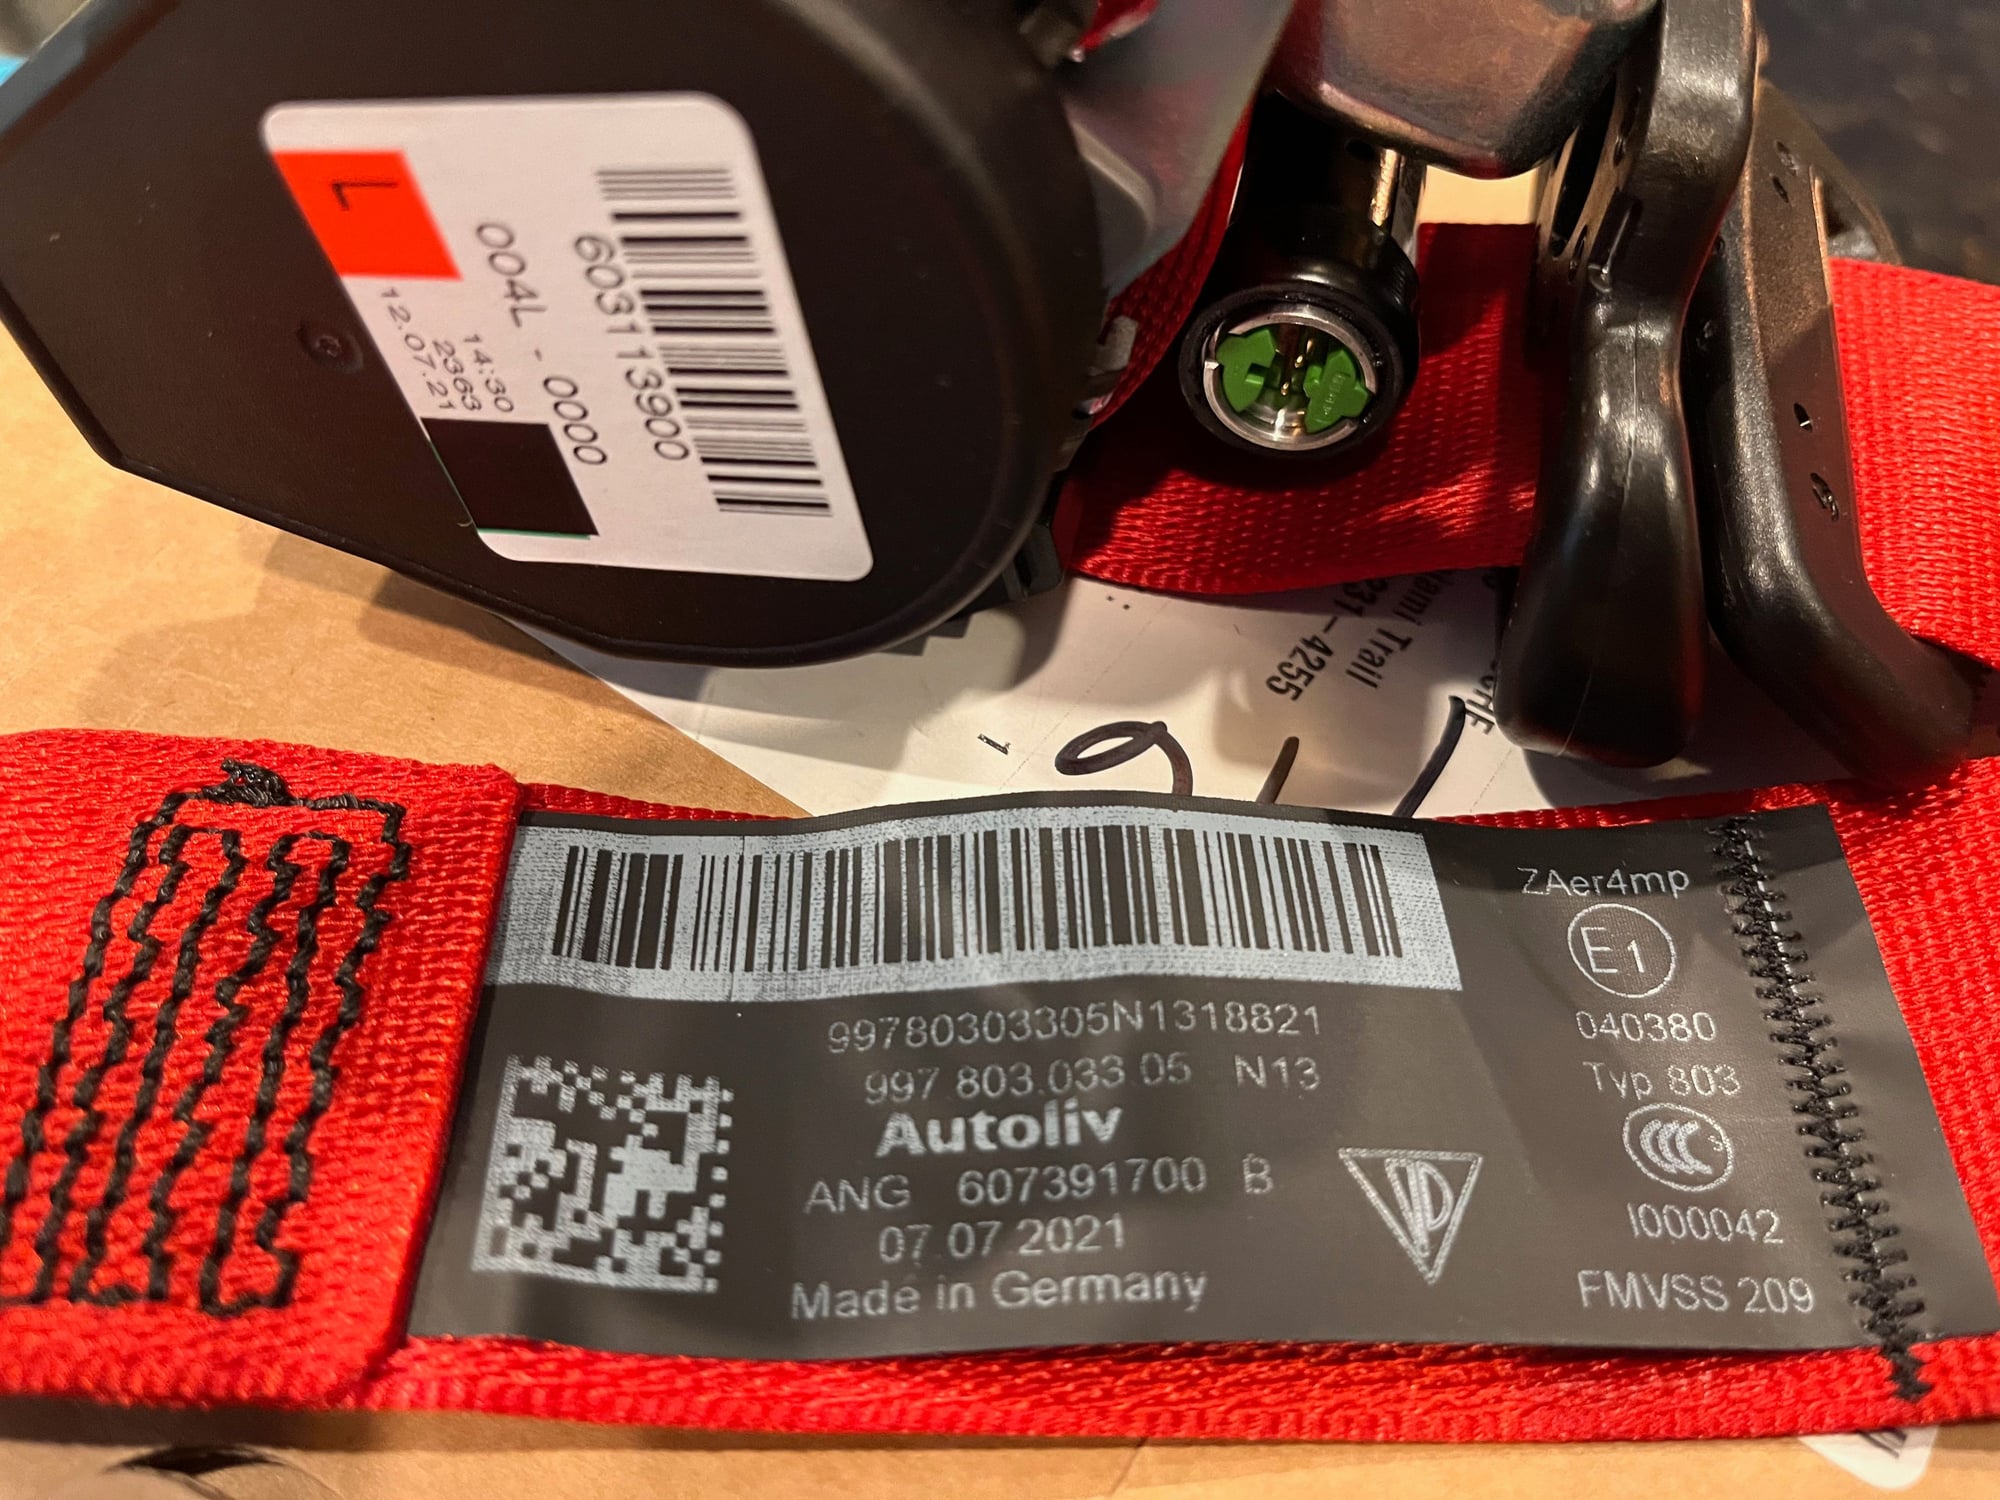 Interior/Upholstery - Porsche 996/ 997 OEM RED SEATBELTS FRONT PAIR- BRAND NEW IN BOX! - New - All Years  All Models - Falls Church, VA 22044, United States